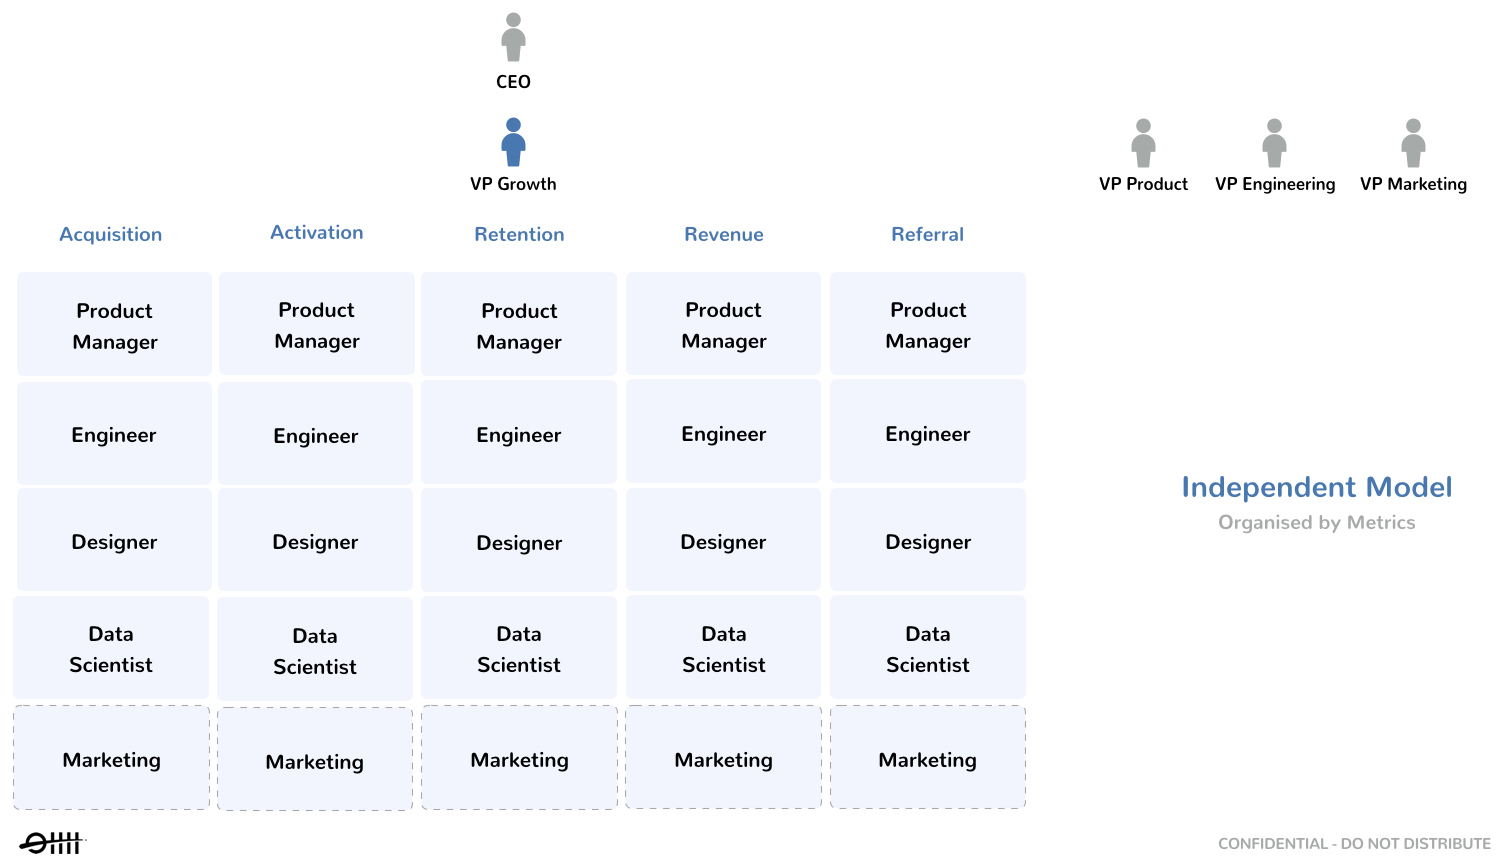 How to scale cross-functional growth teams